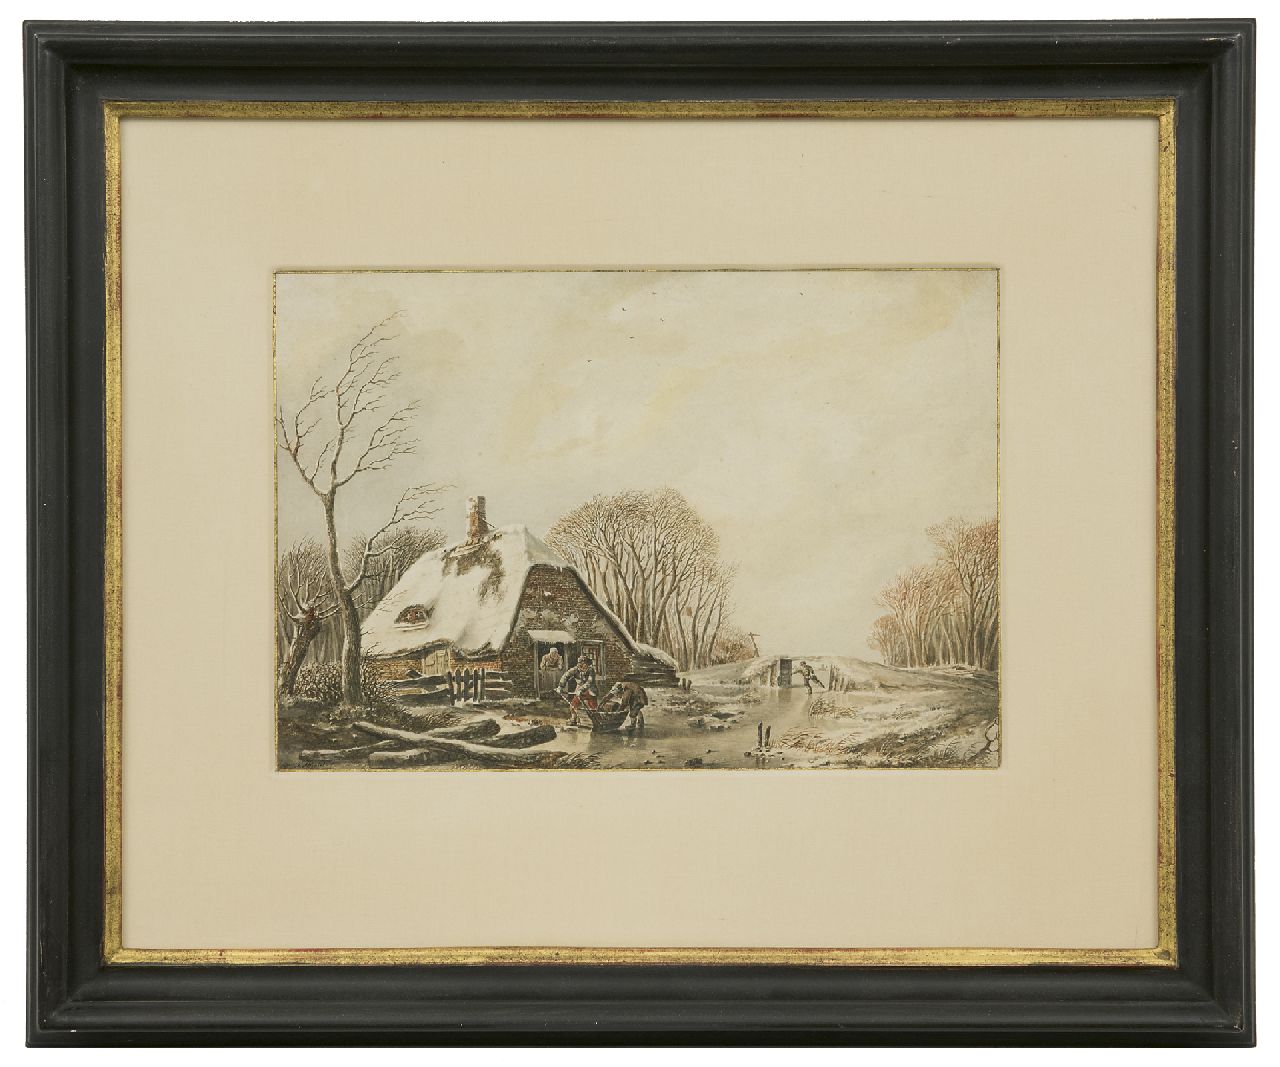 Schelfhout A.  | Andreas Schelfhout, Loading the pushing sledge, ink and watercolour on paper 19.5 x 27.8 cm, signed l.l. and painted ca. 1810-1815